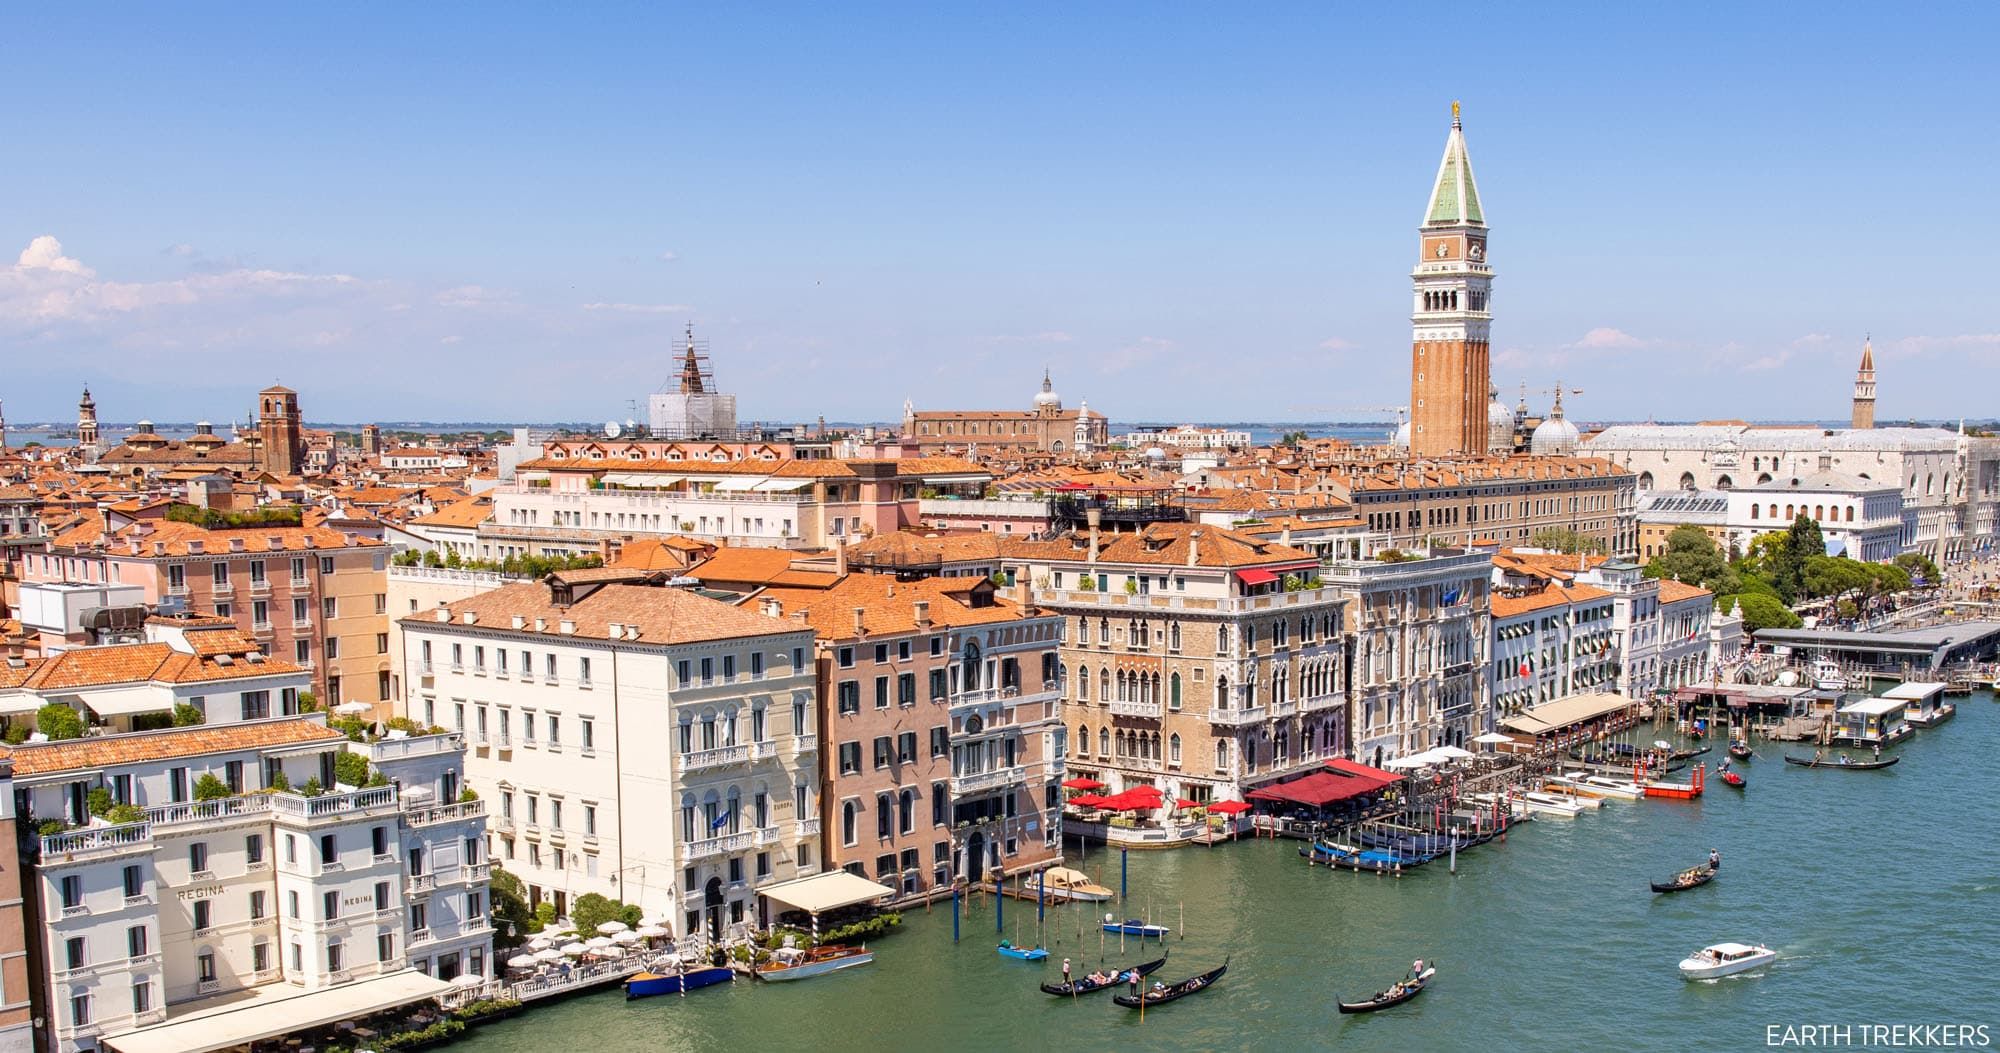 Featured image for “Venice Bucket List: 20 Amazing Things to Do in Venice, Italy”